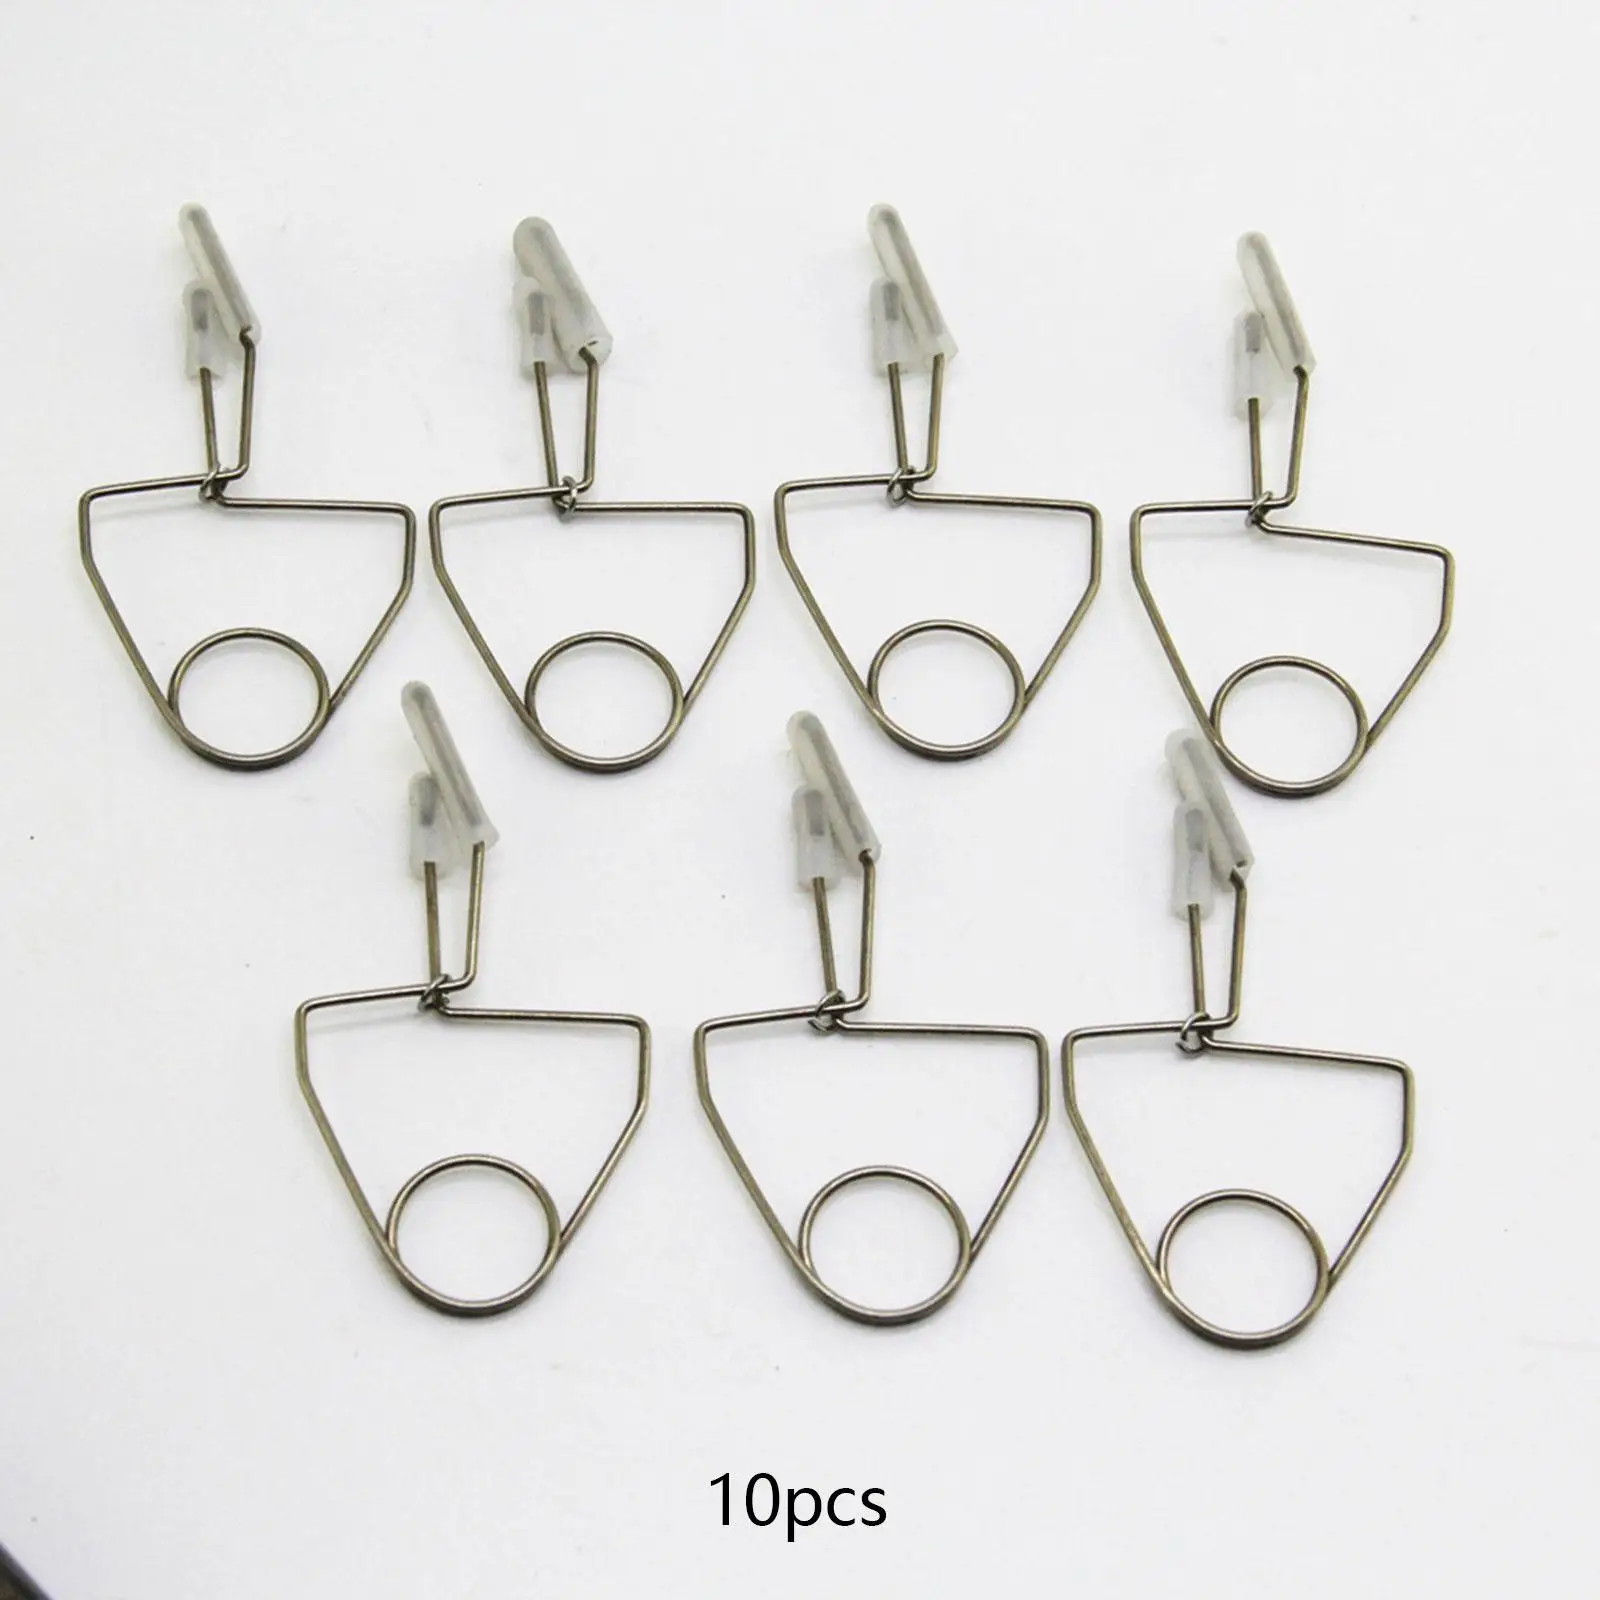 10Pcs Flute Pad Clip Repair Tool Durable Wind Instrument Pad Replacement Portable Small for Bassoon Sax Flute Clarinet Supplies